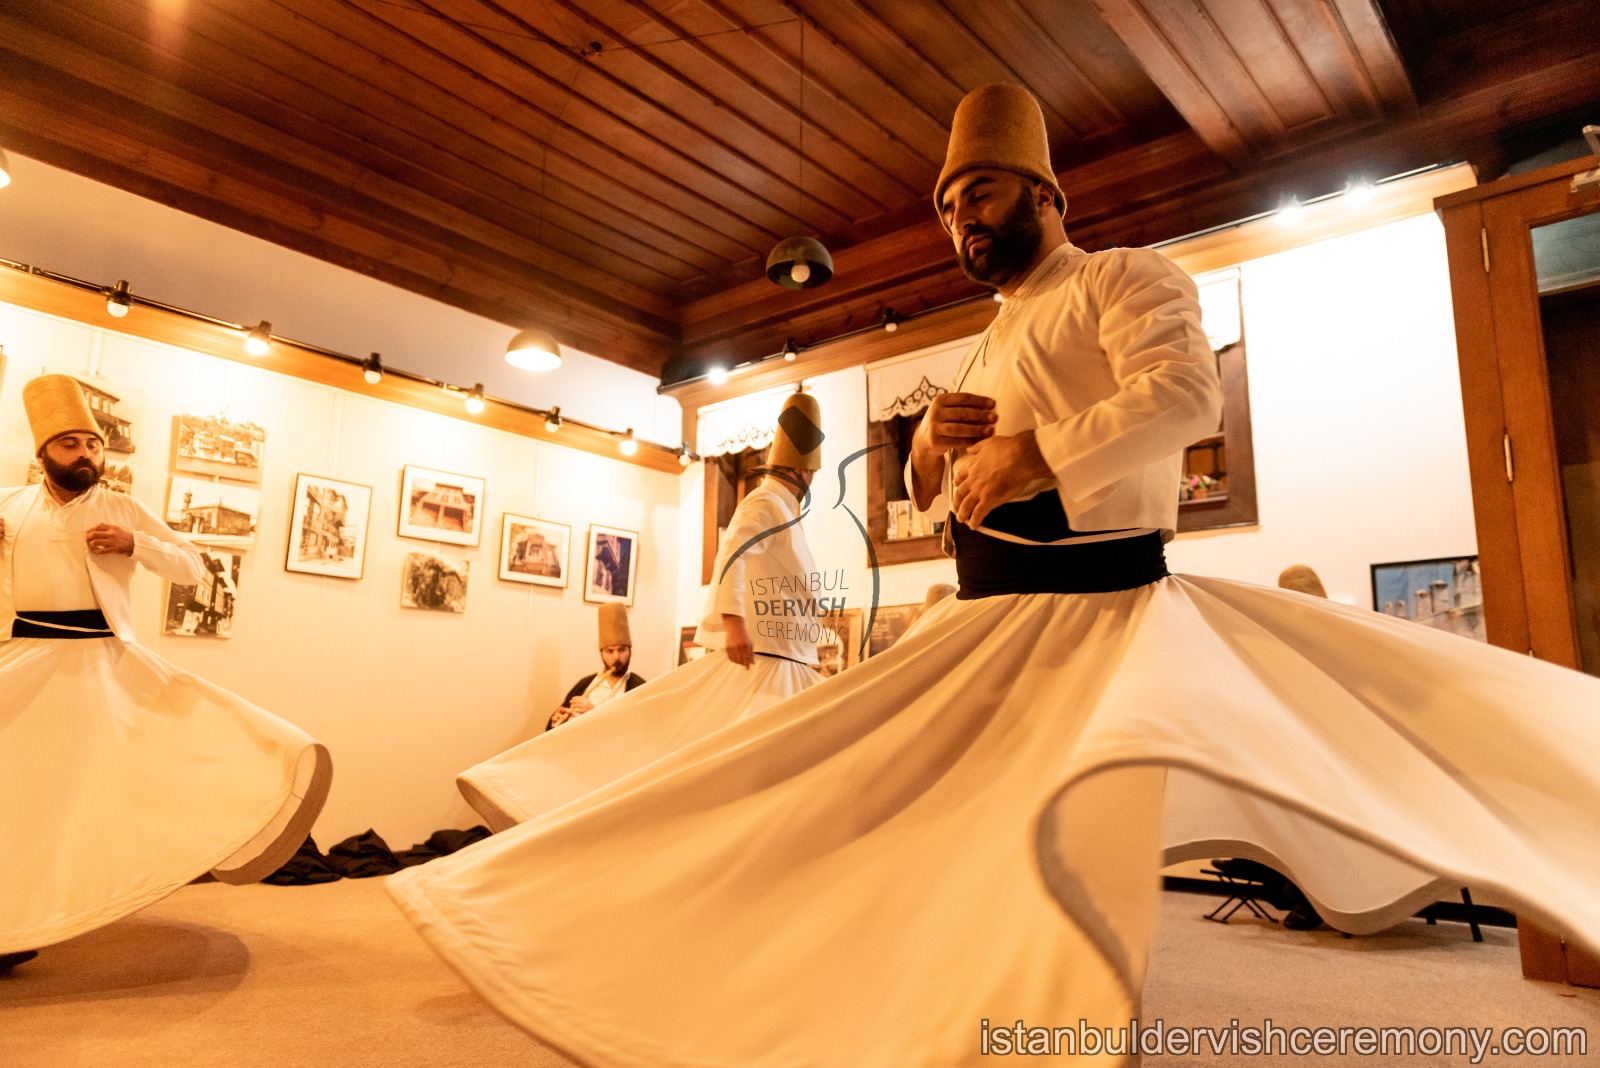 Whirling Dervishes Ceremony in a Real Sufi Monastery in Istanbul